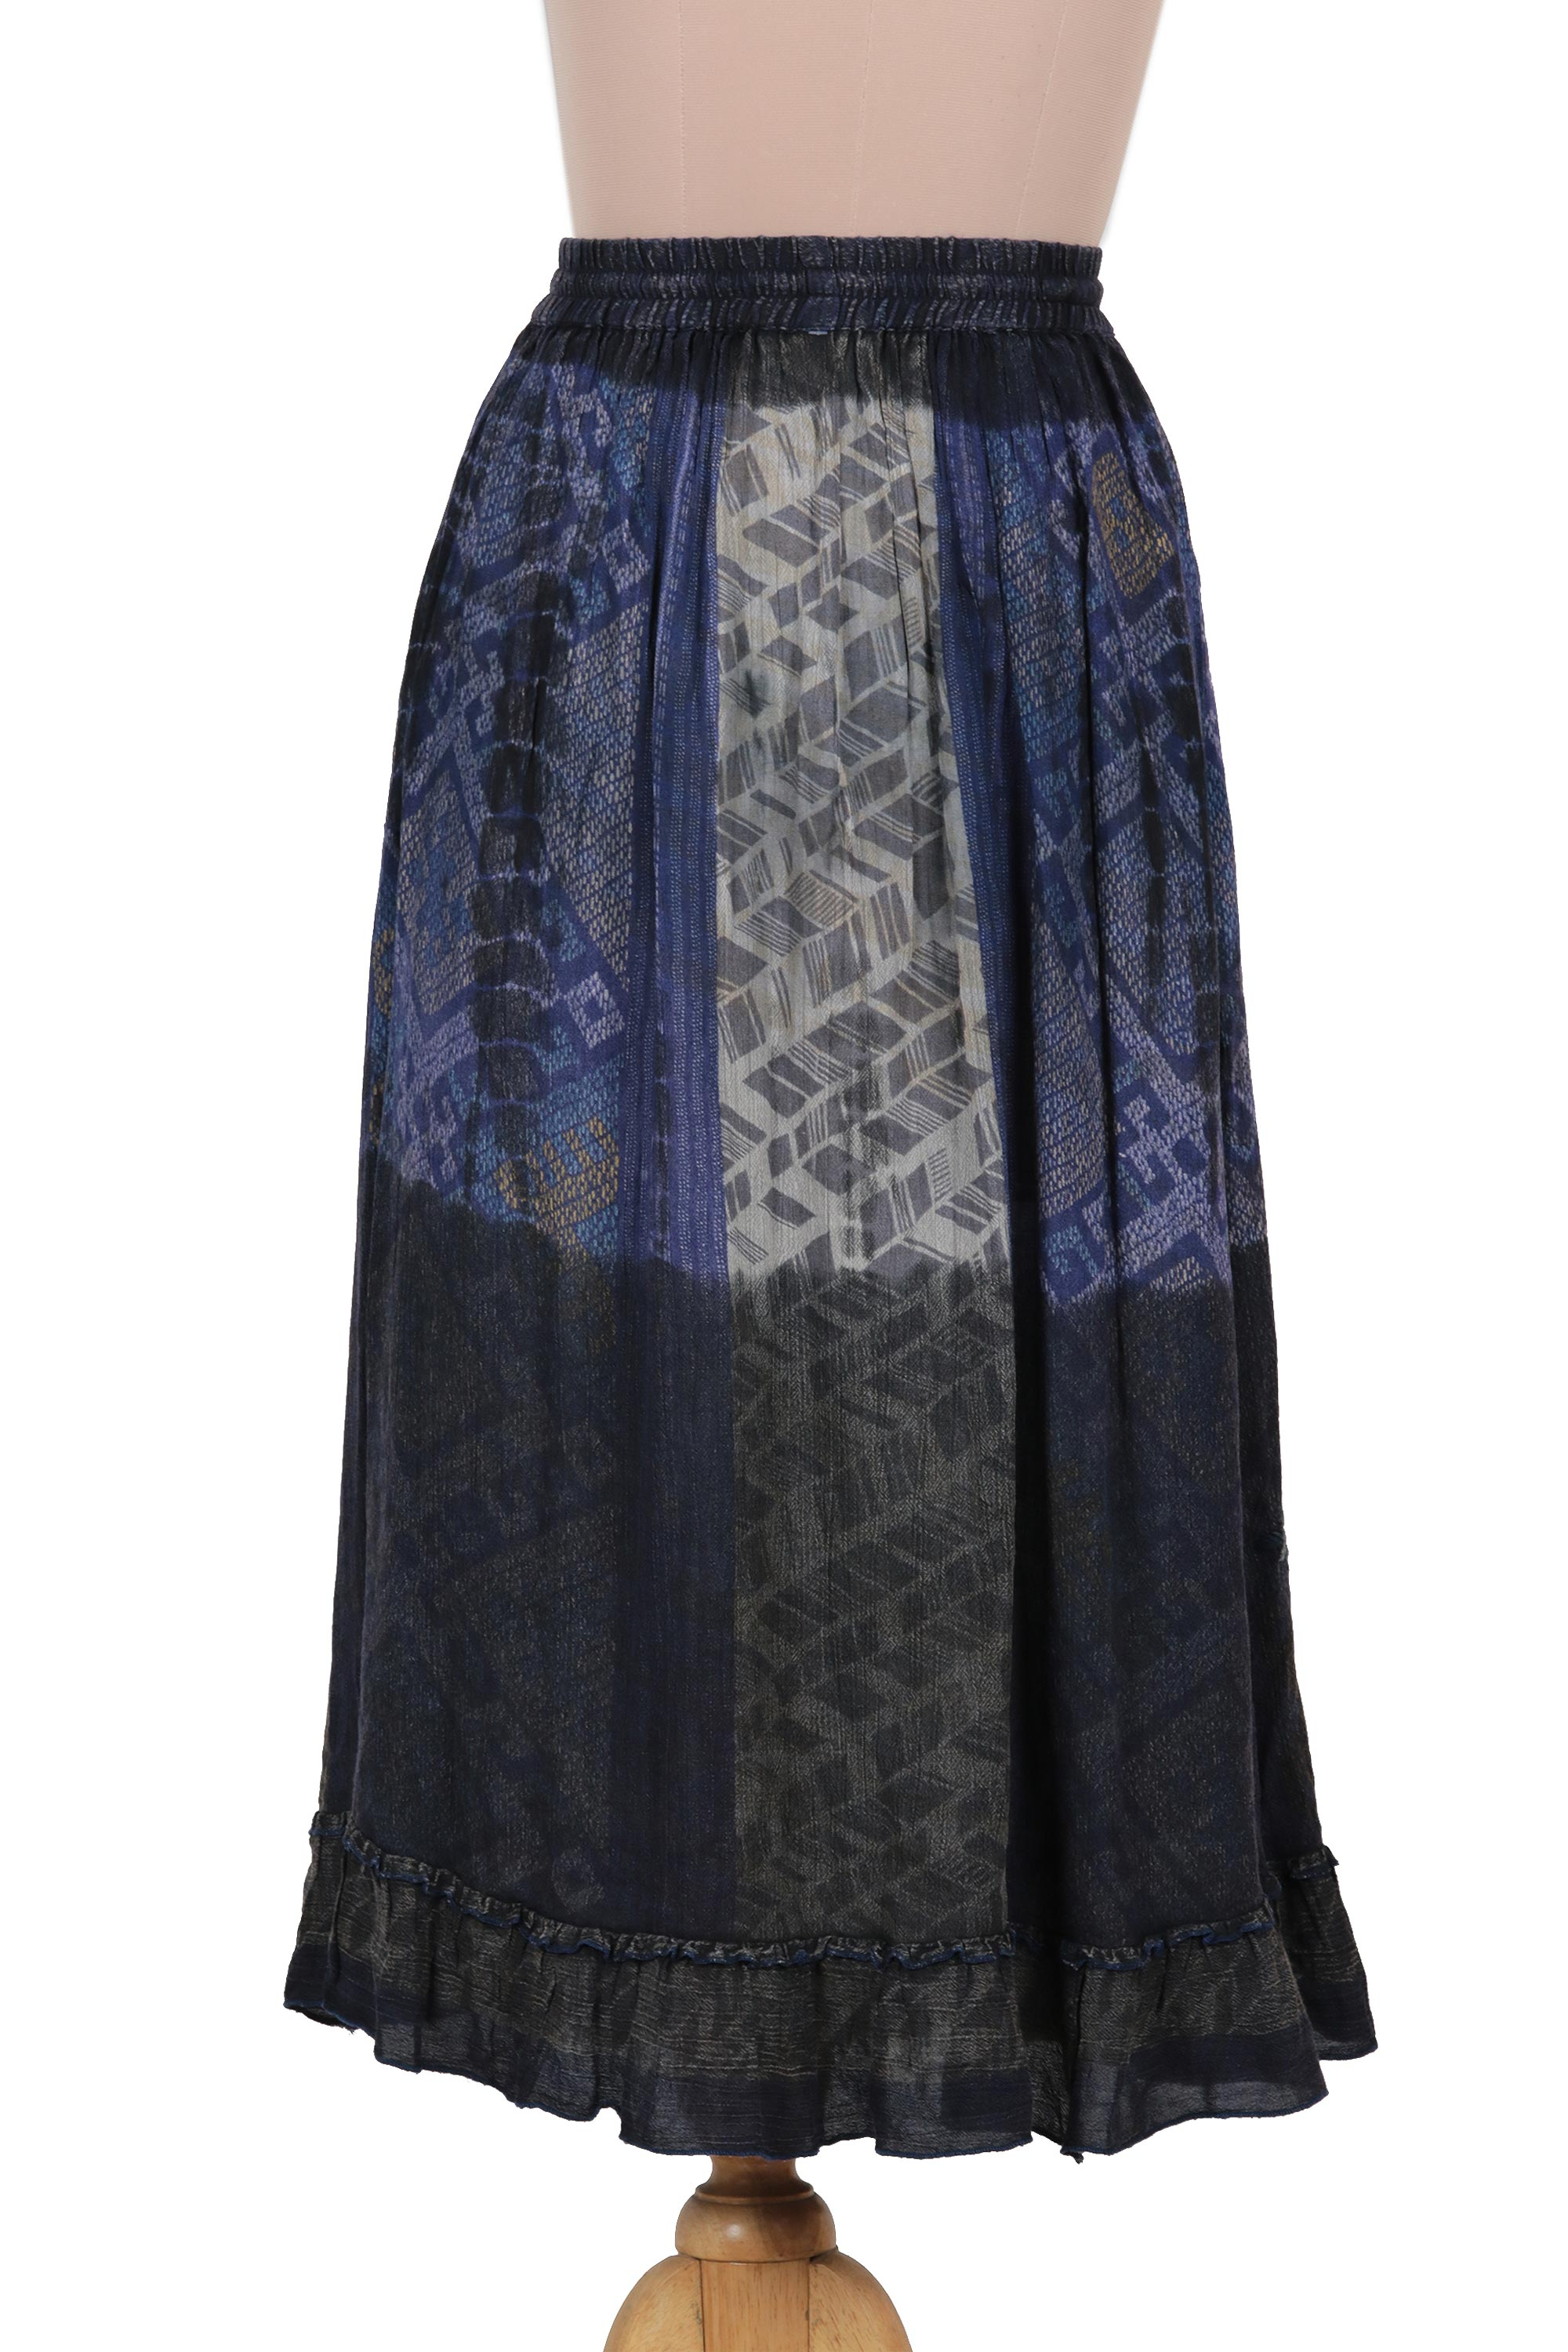 UNICEF Market | Embroidered Rayon Print Peasant Skirt in Blue and Grey ...